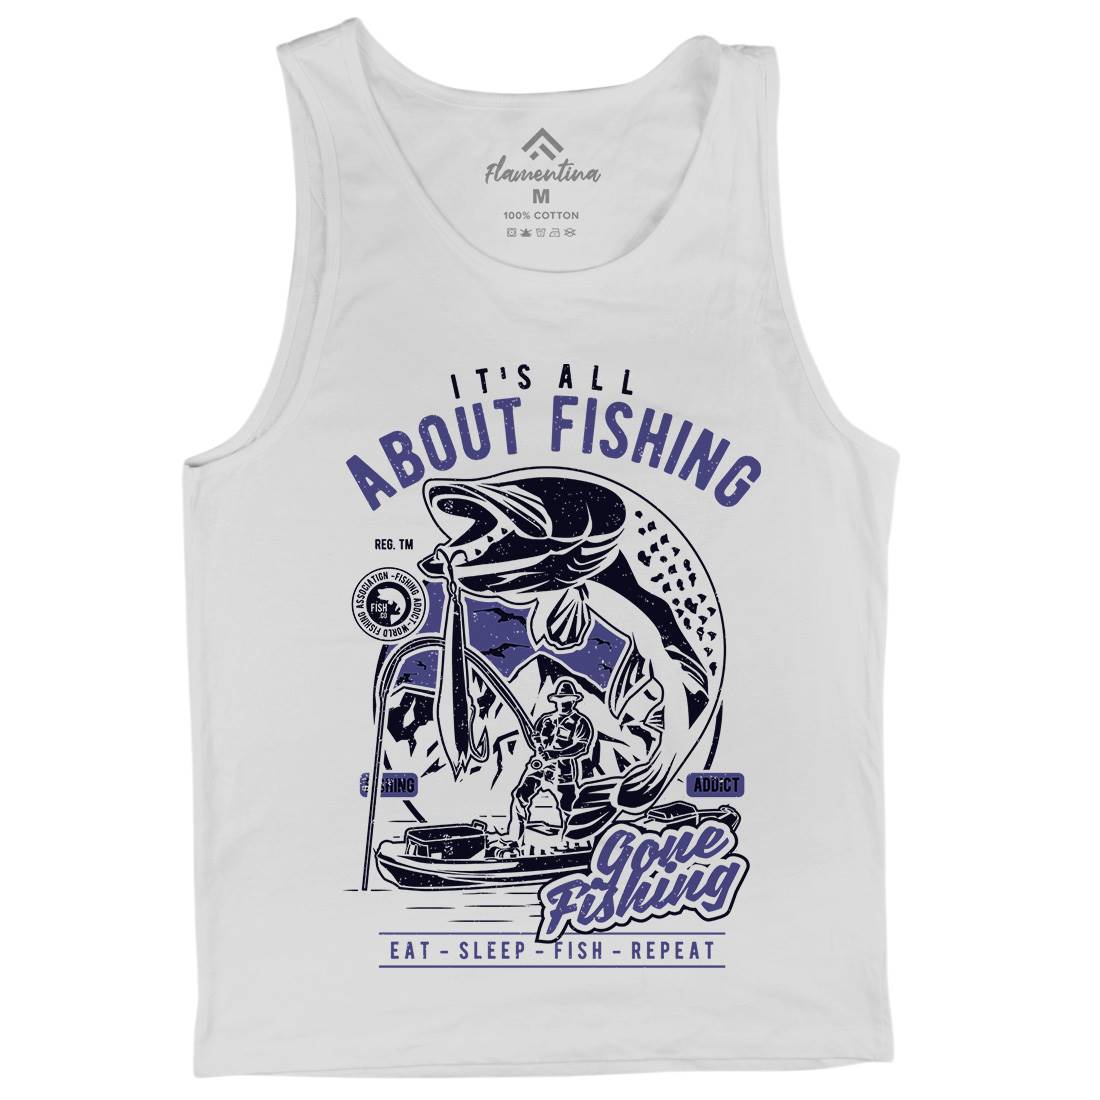 All About Mens Tank Top Vest Fishing A604